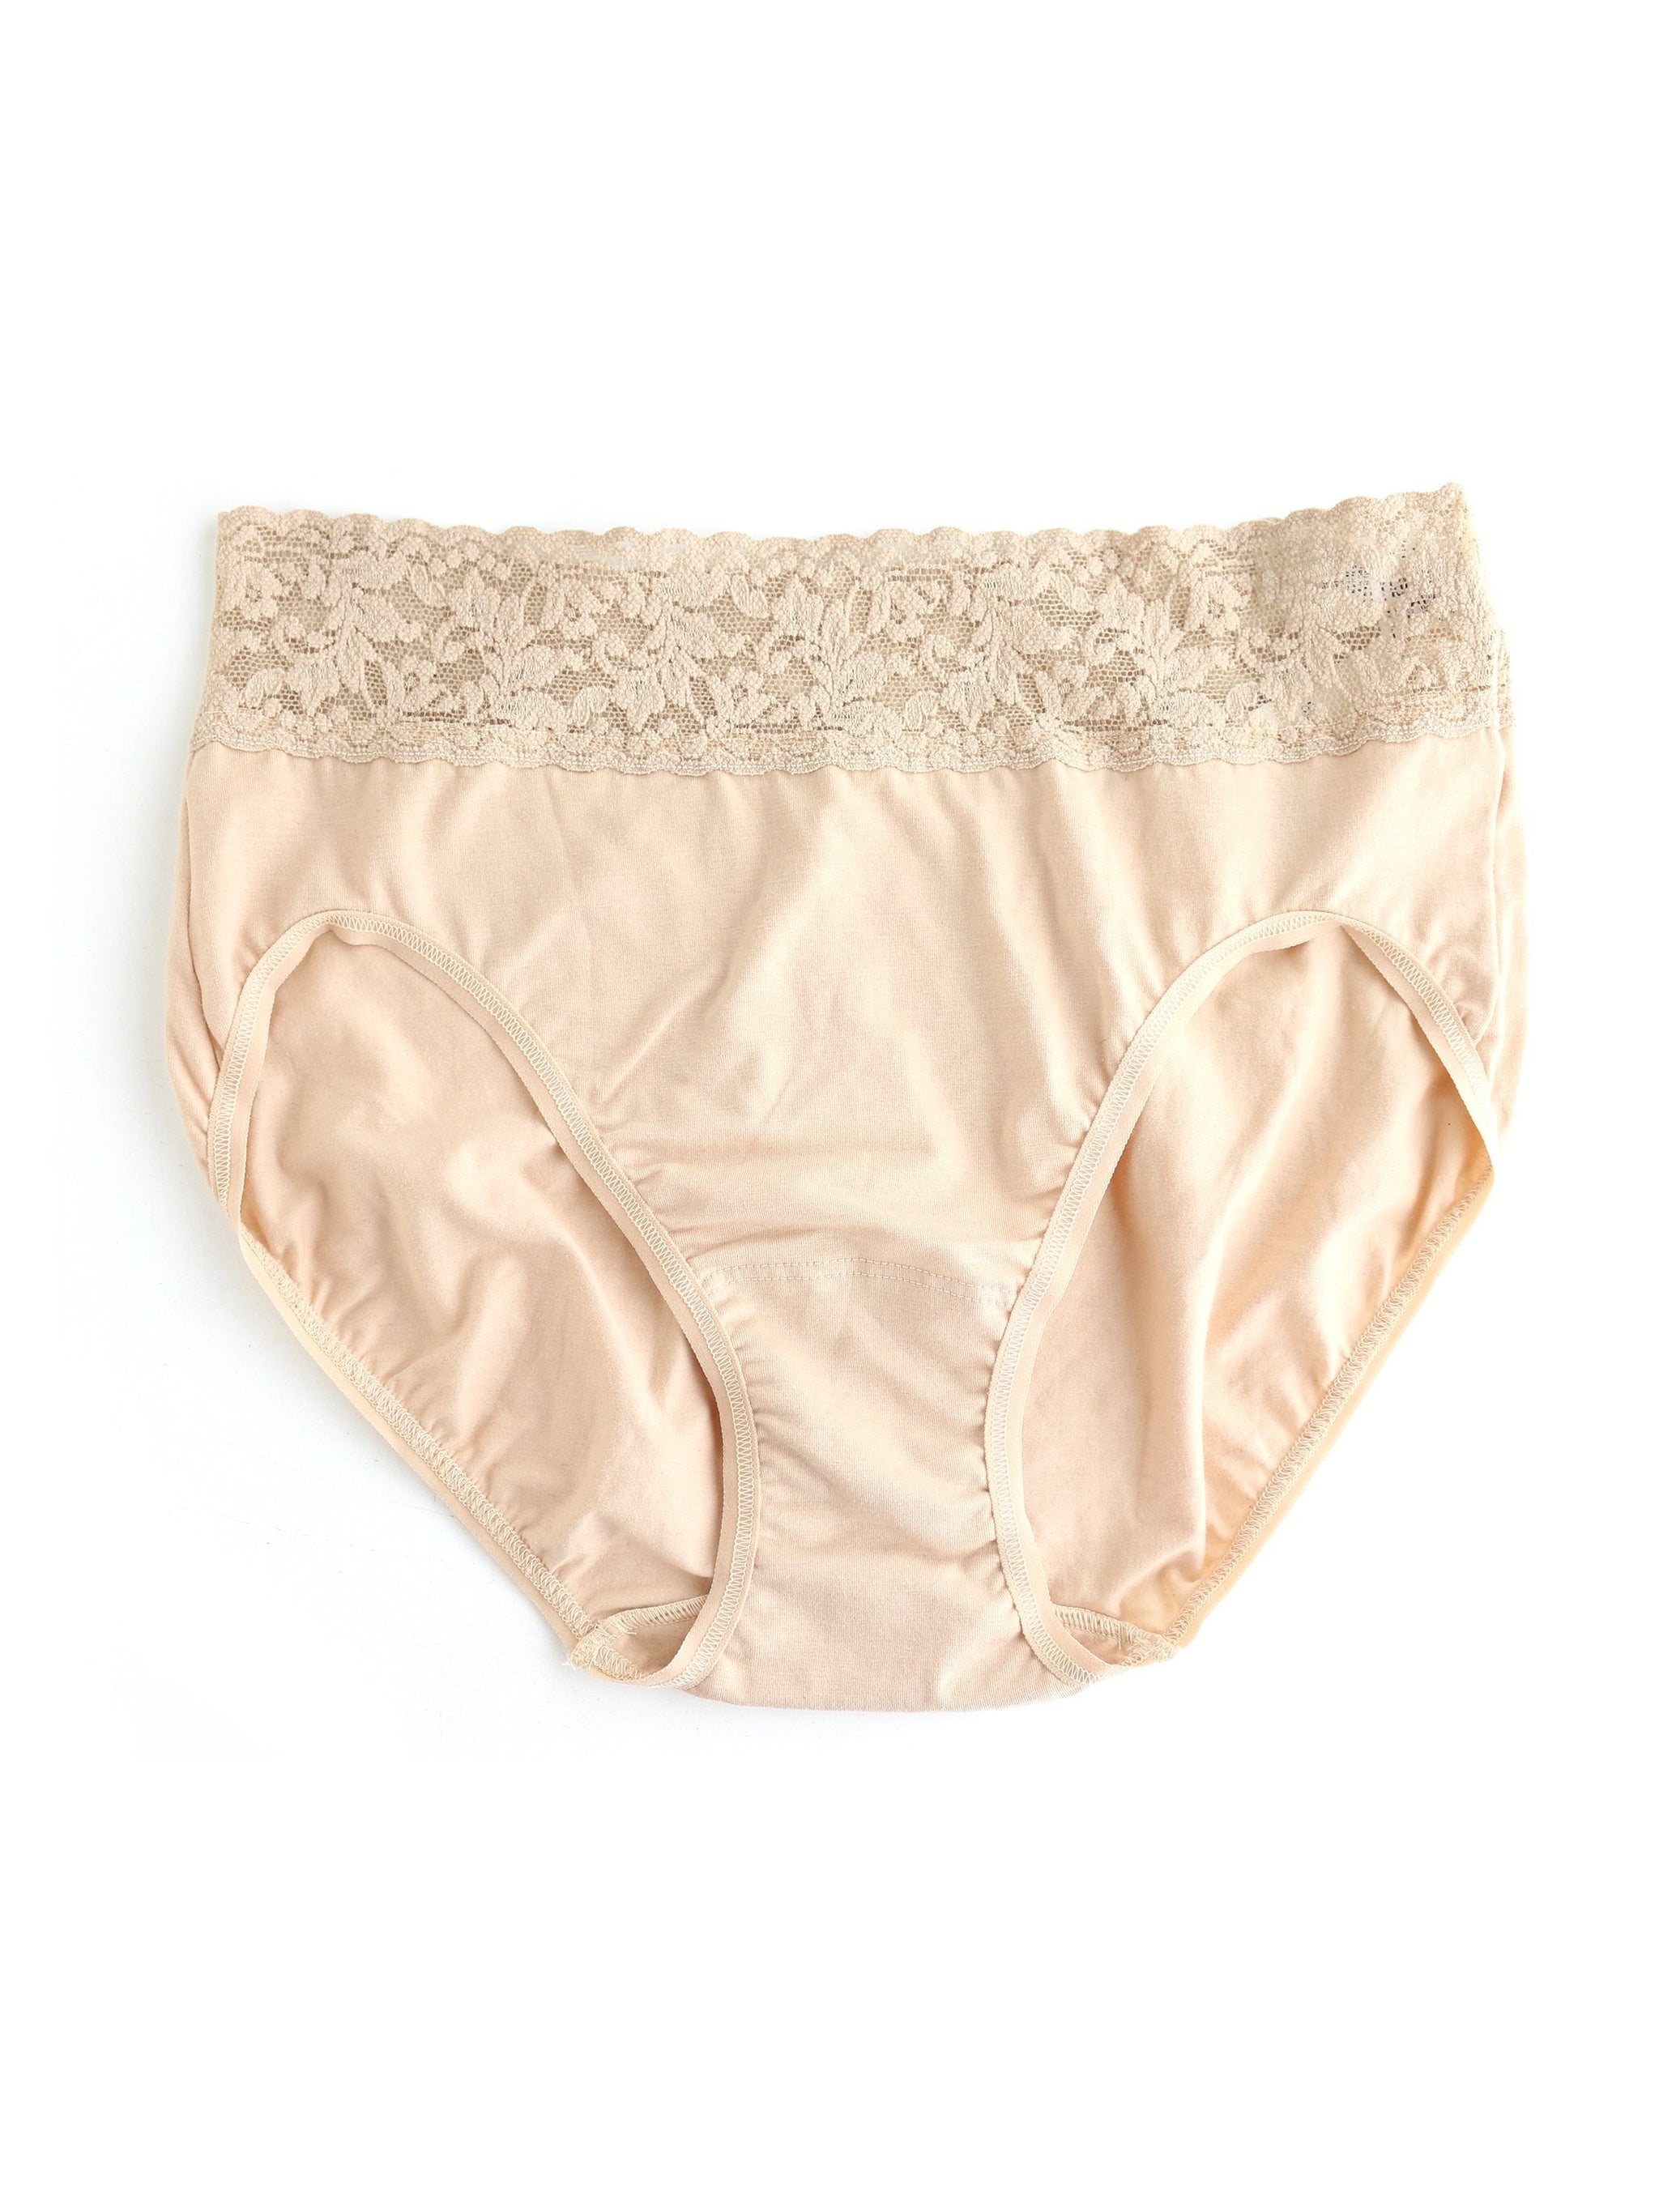 Ready to Ship: Ethel Cotton High Waist Panties- High Leg- Ivory Size S-  Comfy Handmade/Hand Dyed Panties- 100% Cotton Lingerie- Sustainable